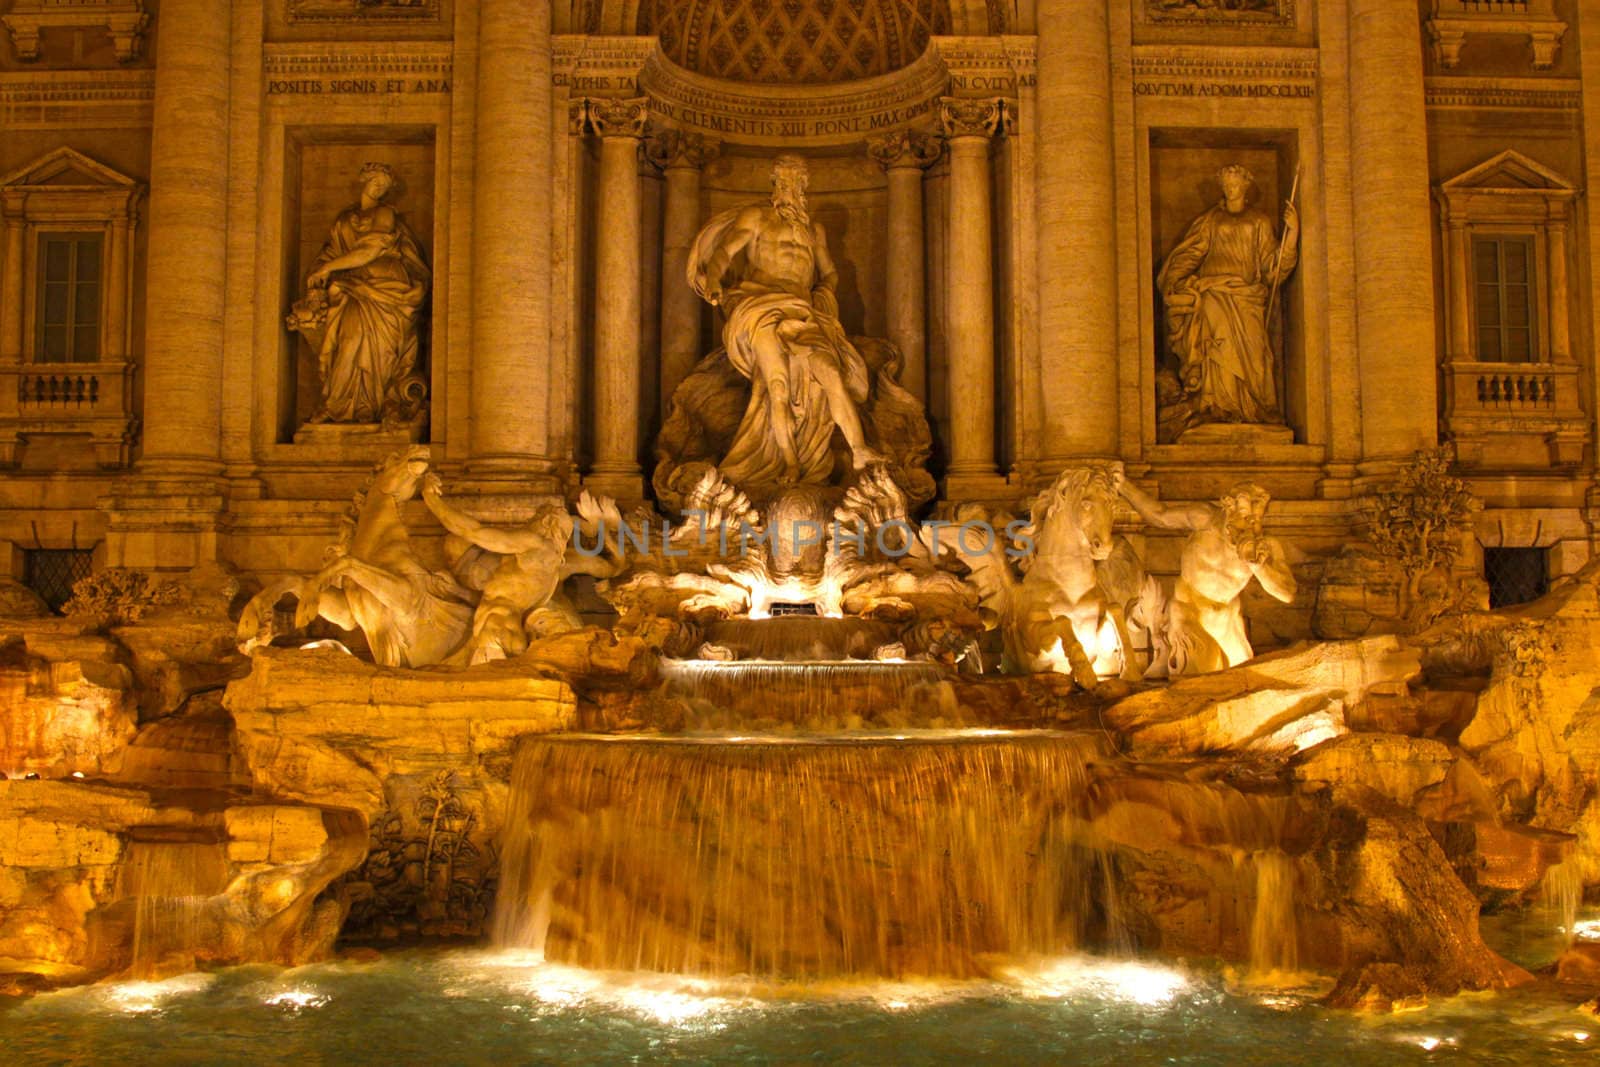 The Trevi Fountain in Rome, Italy. (shot at night)